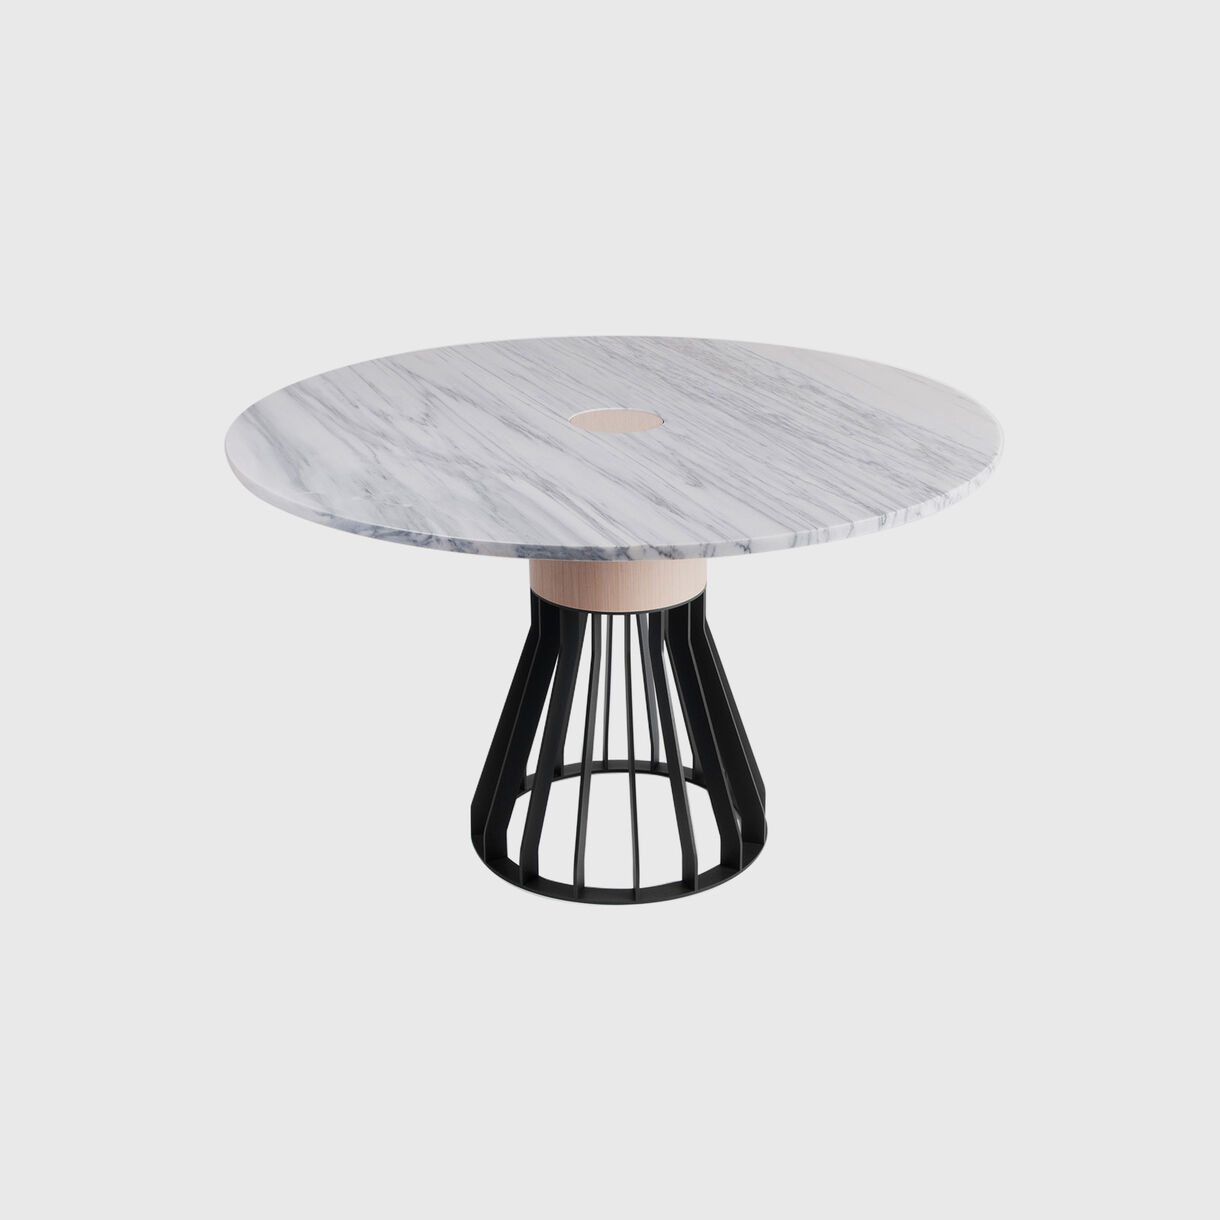 Mewoma Table, Round